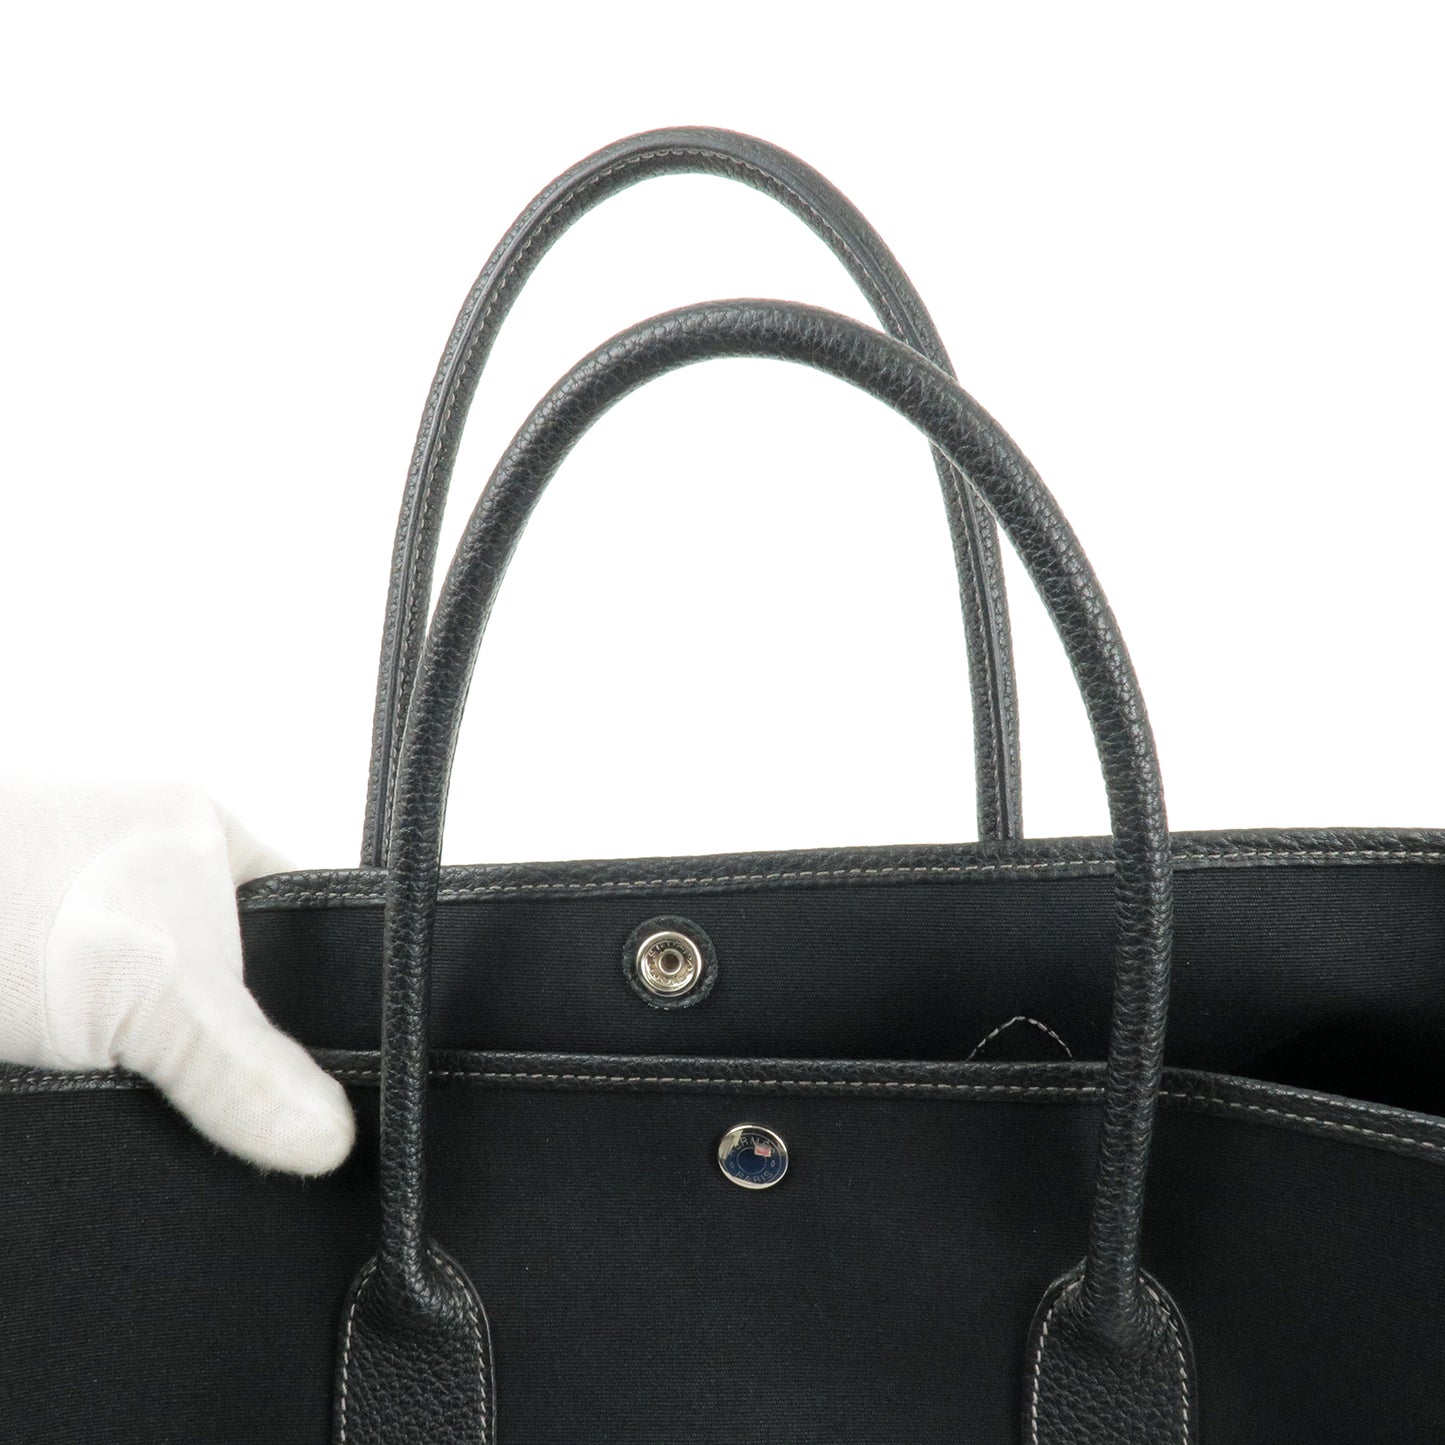 HERMES Garden Party PM Canvas Leather Tote Bag Black